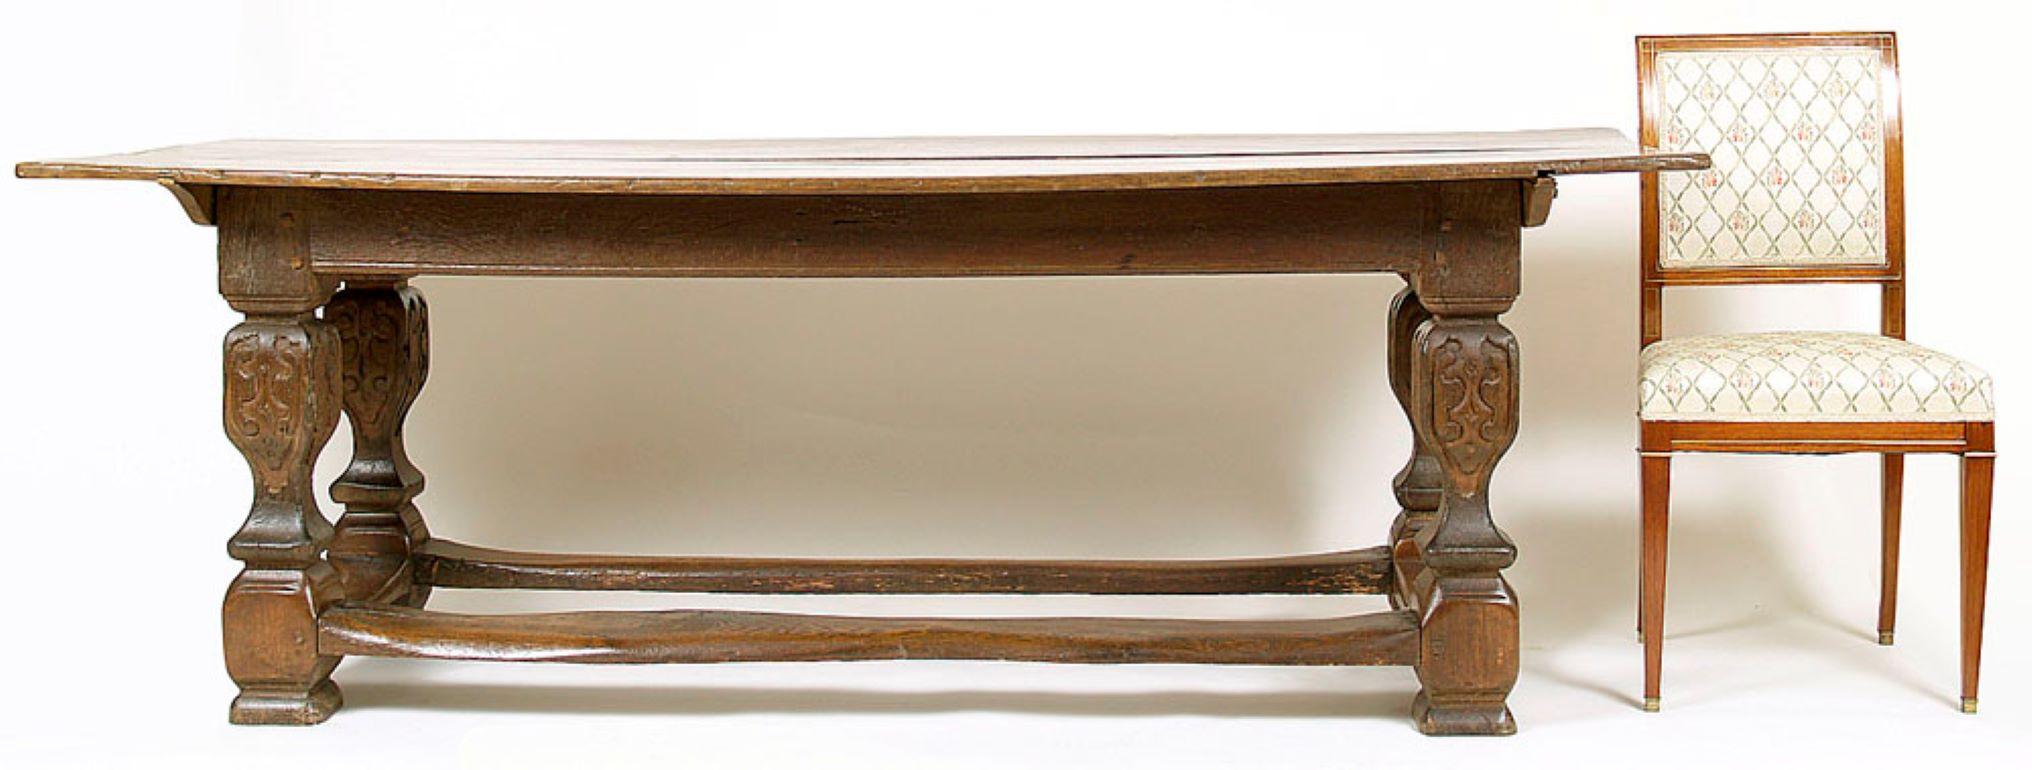 18th Century Solid Oak Baroque Refectory Table For Sale 1